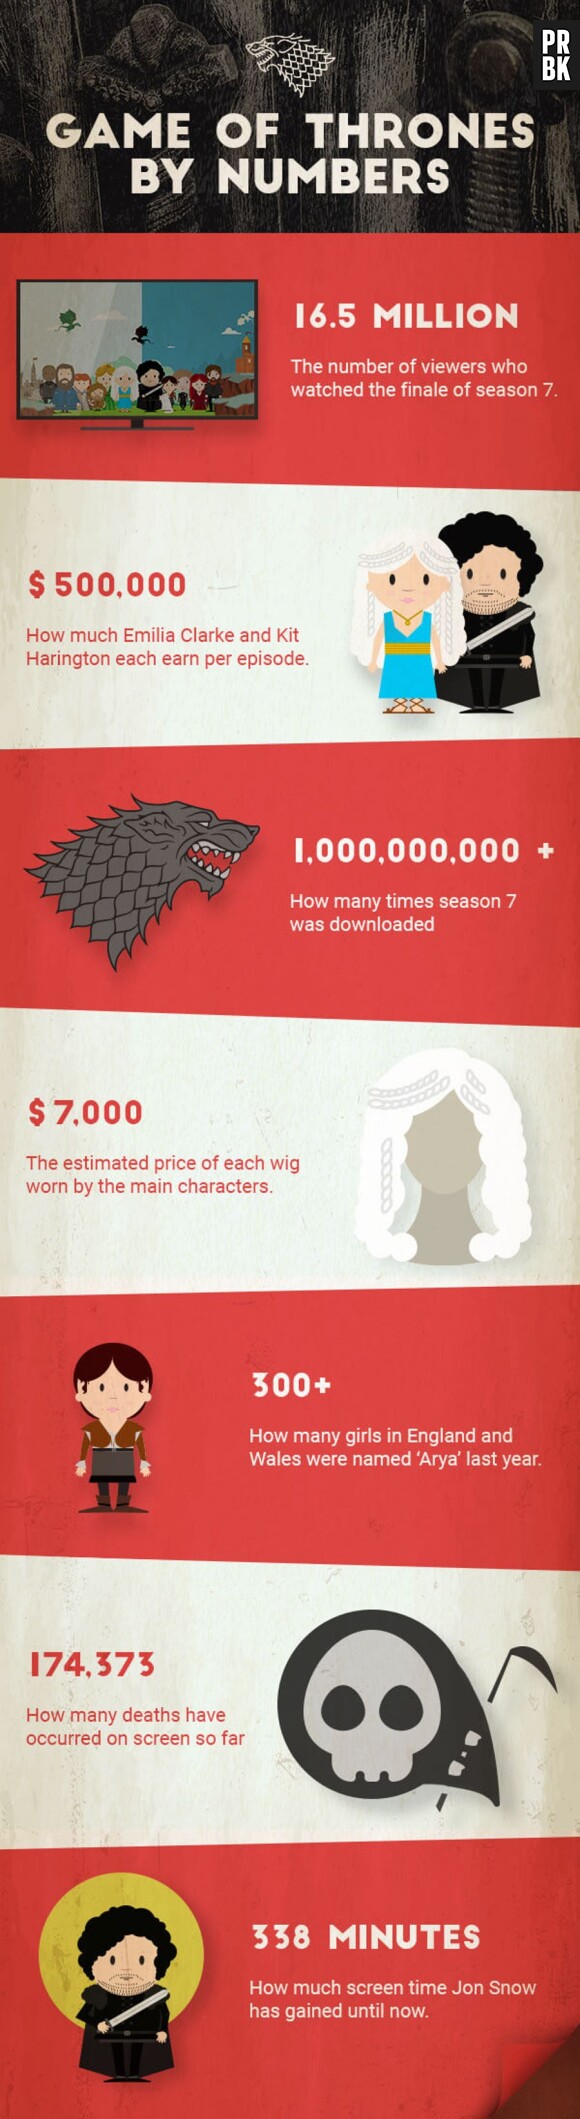 Game of Thrones : infographie